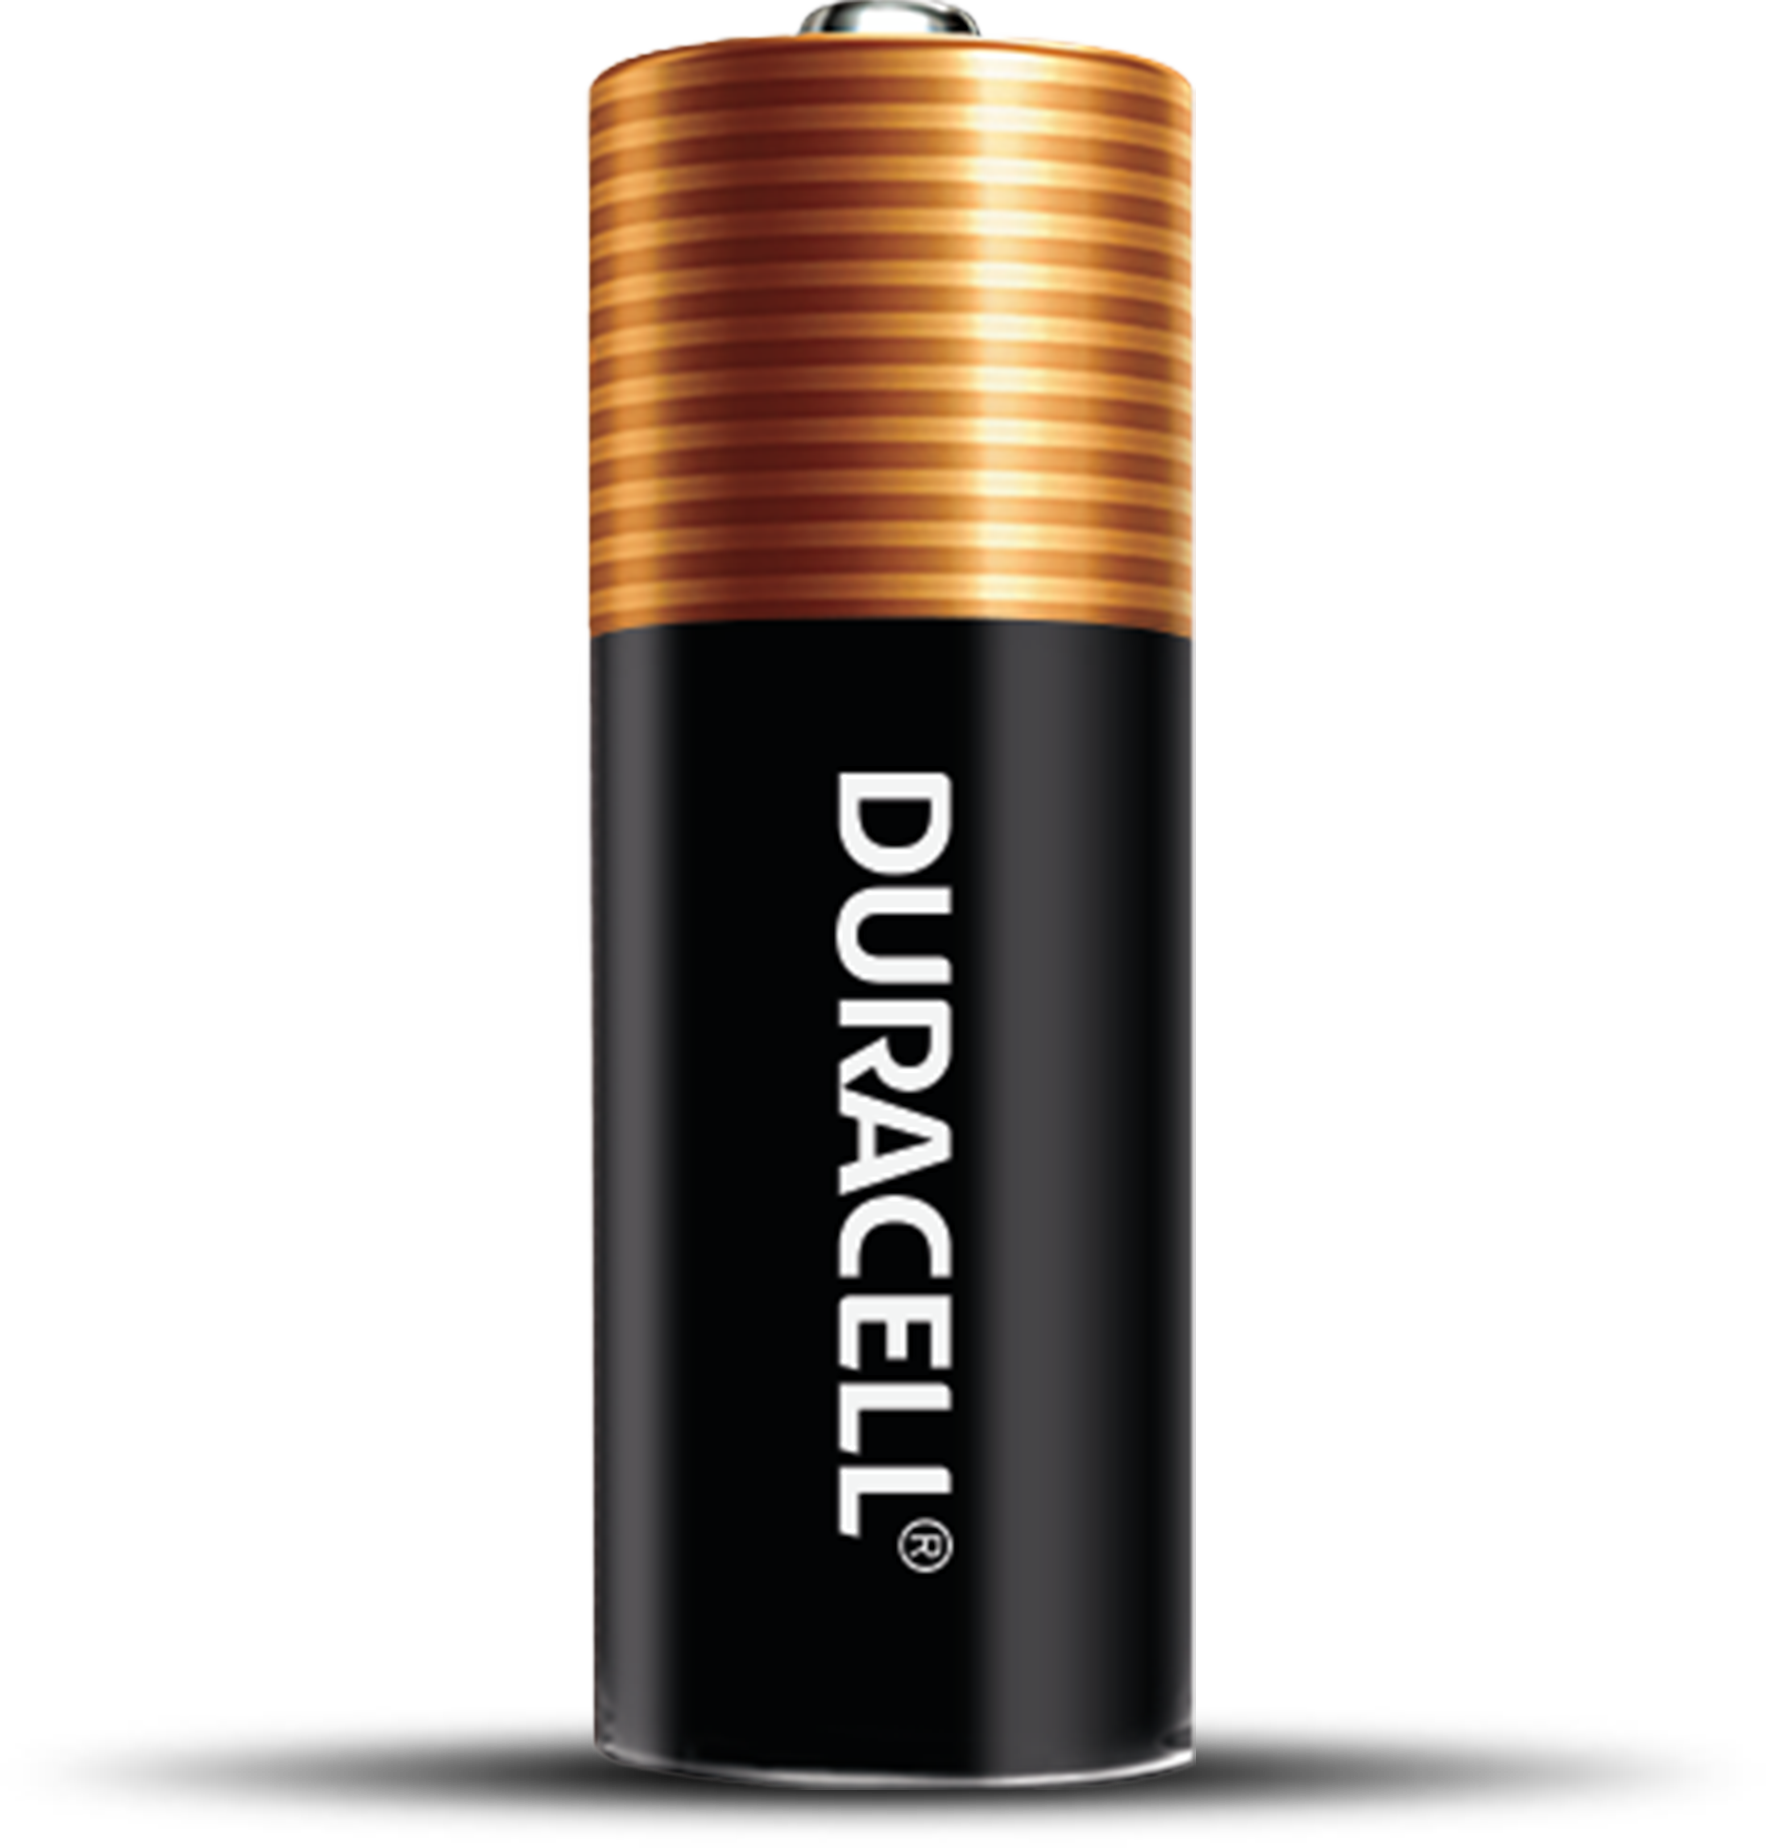 Duracell Charger Charger Cef14 incl. 2x AA1300mah & 2x AAA 750mah